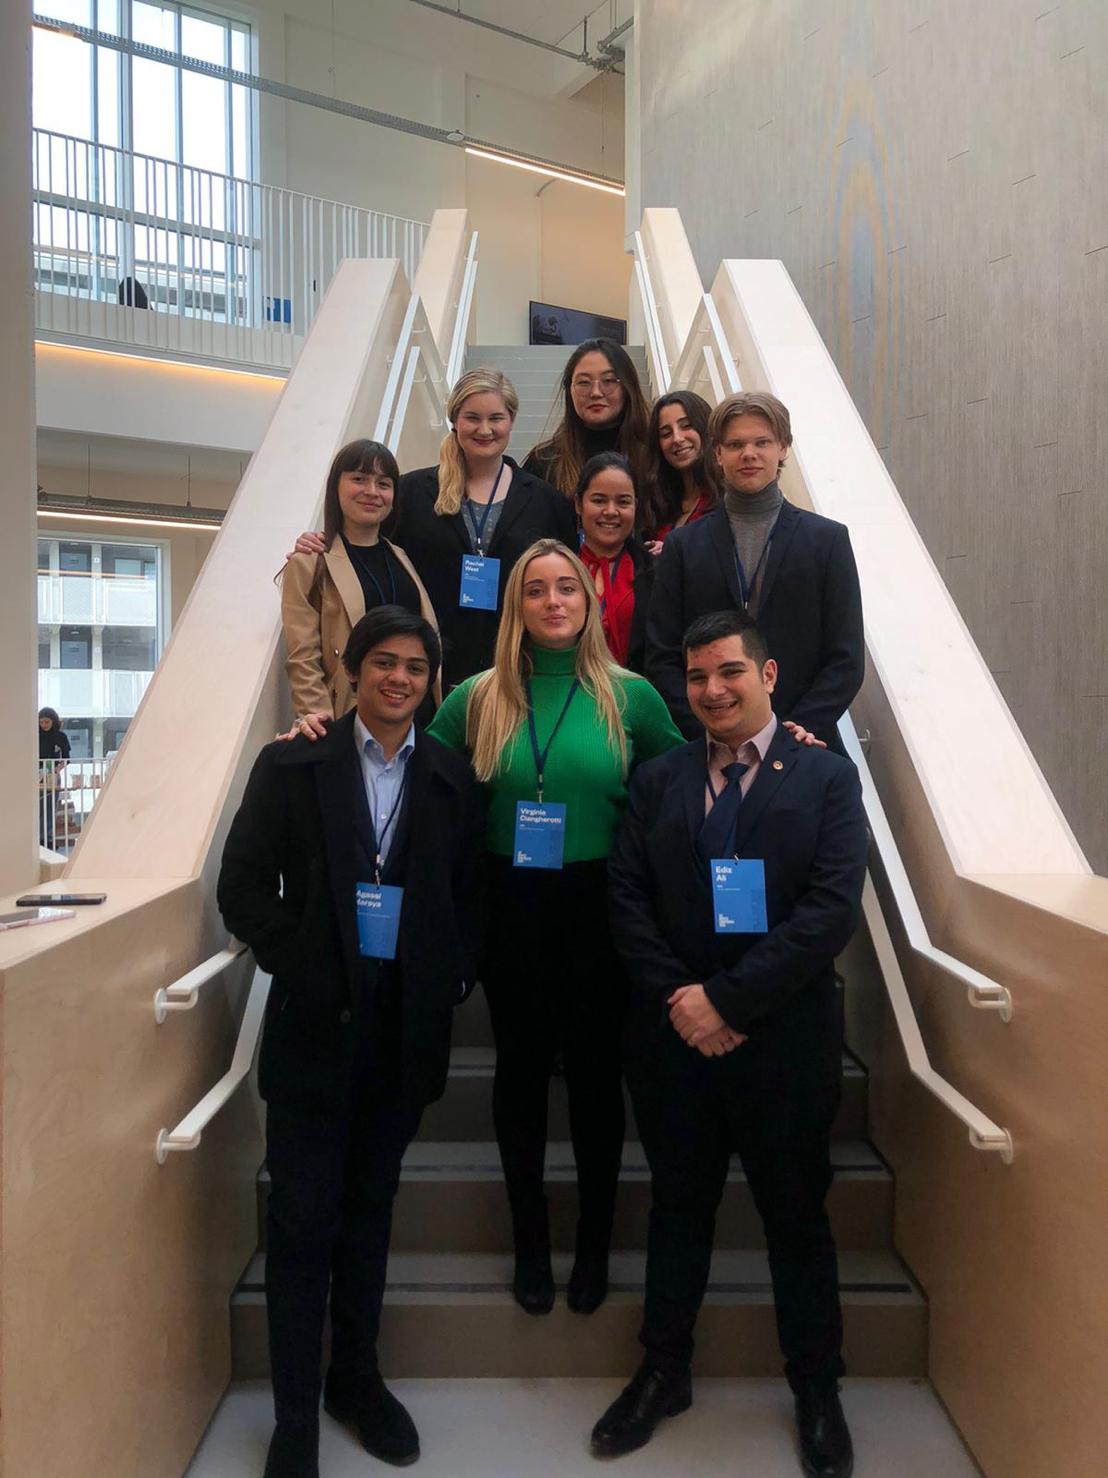 WBC consultants attended the annual JEE Winter Conference 2019 in Brussels, Belgium